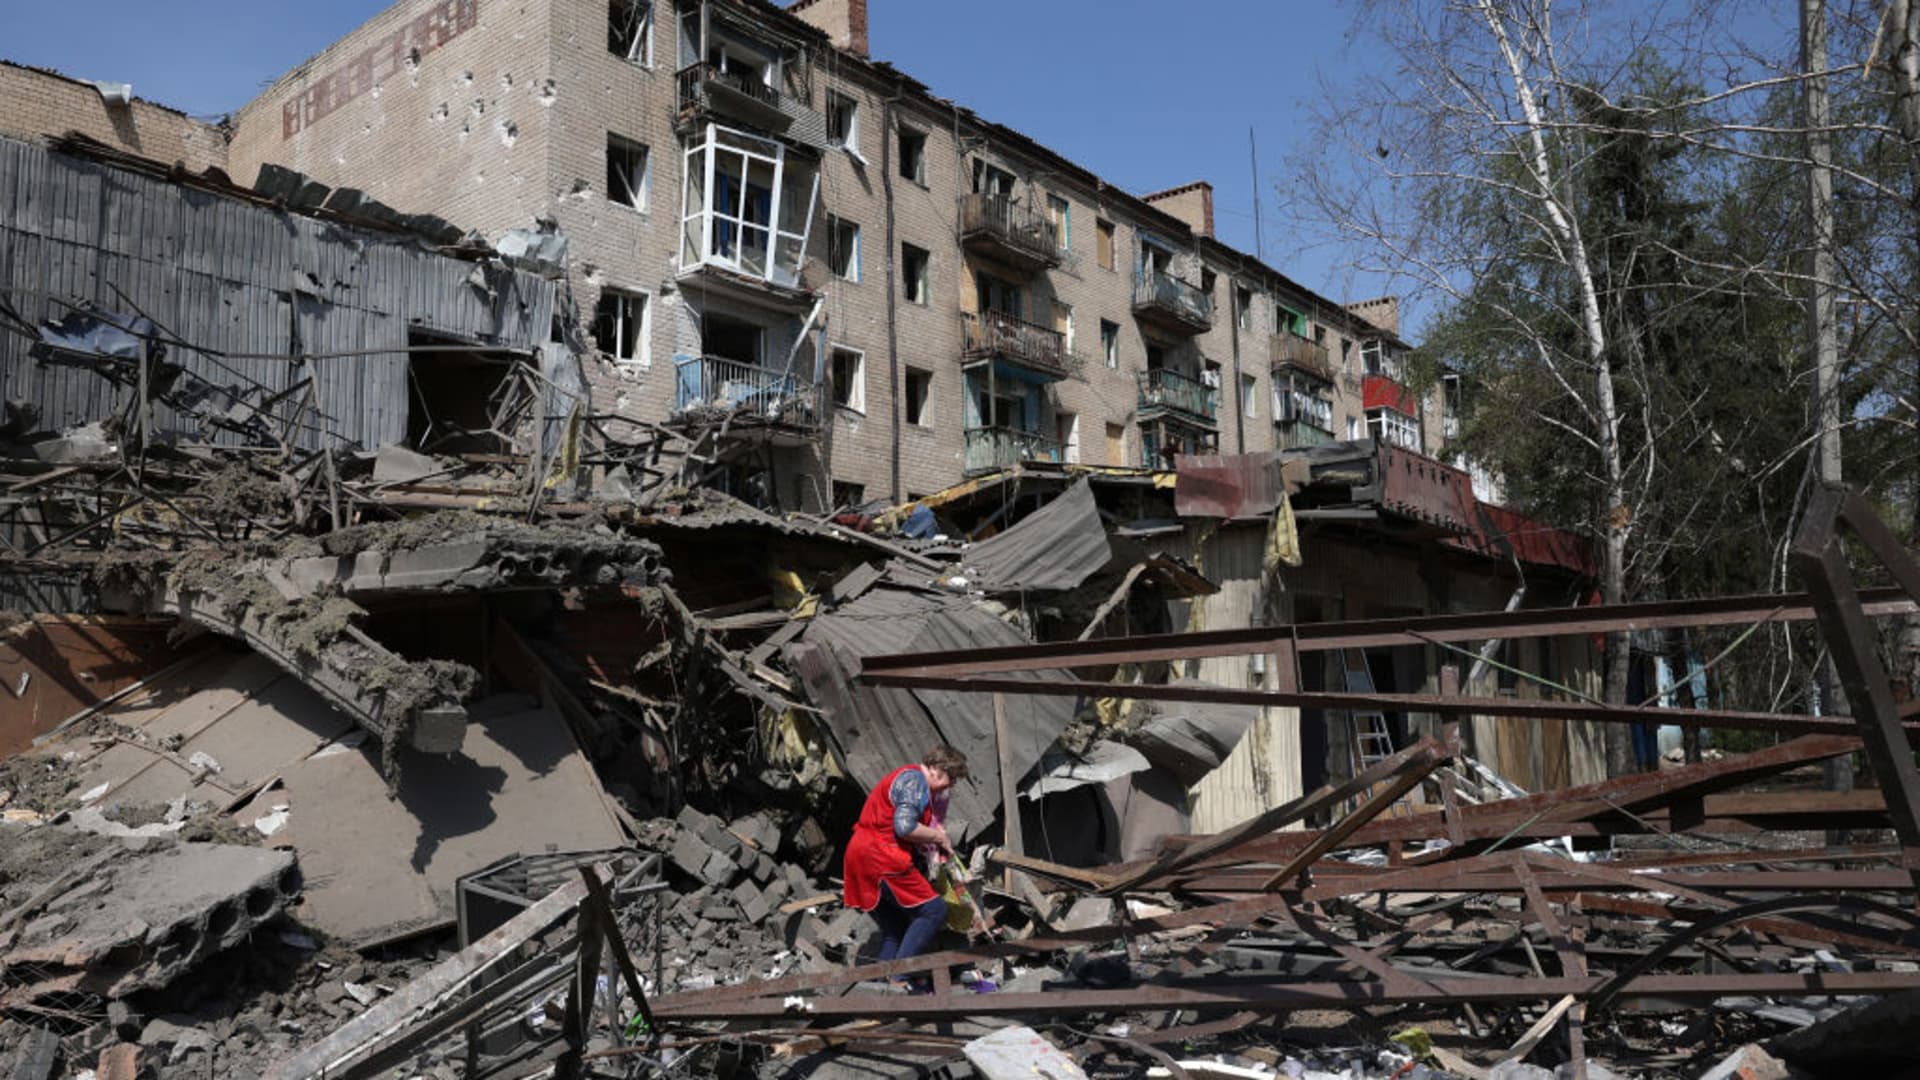 A woman looks through the rubble of a building destroyed by bombing in the town of Kostyantynivka, Donetsk region, on April 11, 2024, amid the Russian invassion in Ukraine. (Photo by Anatolii STEPANOV / AFP) (Photo by ANATOLII STEPANOV/AFP via Getty Images)